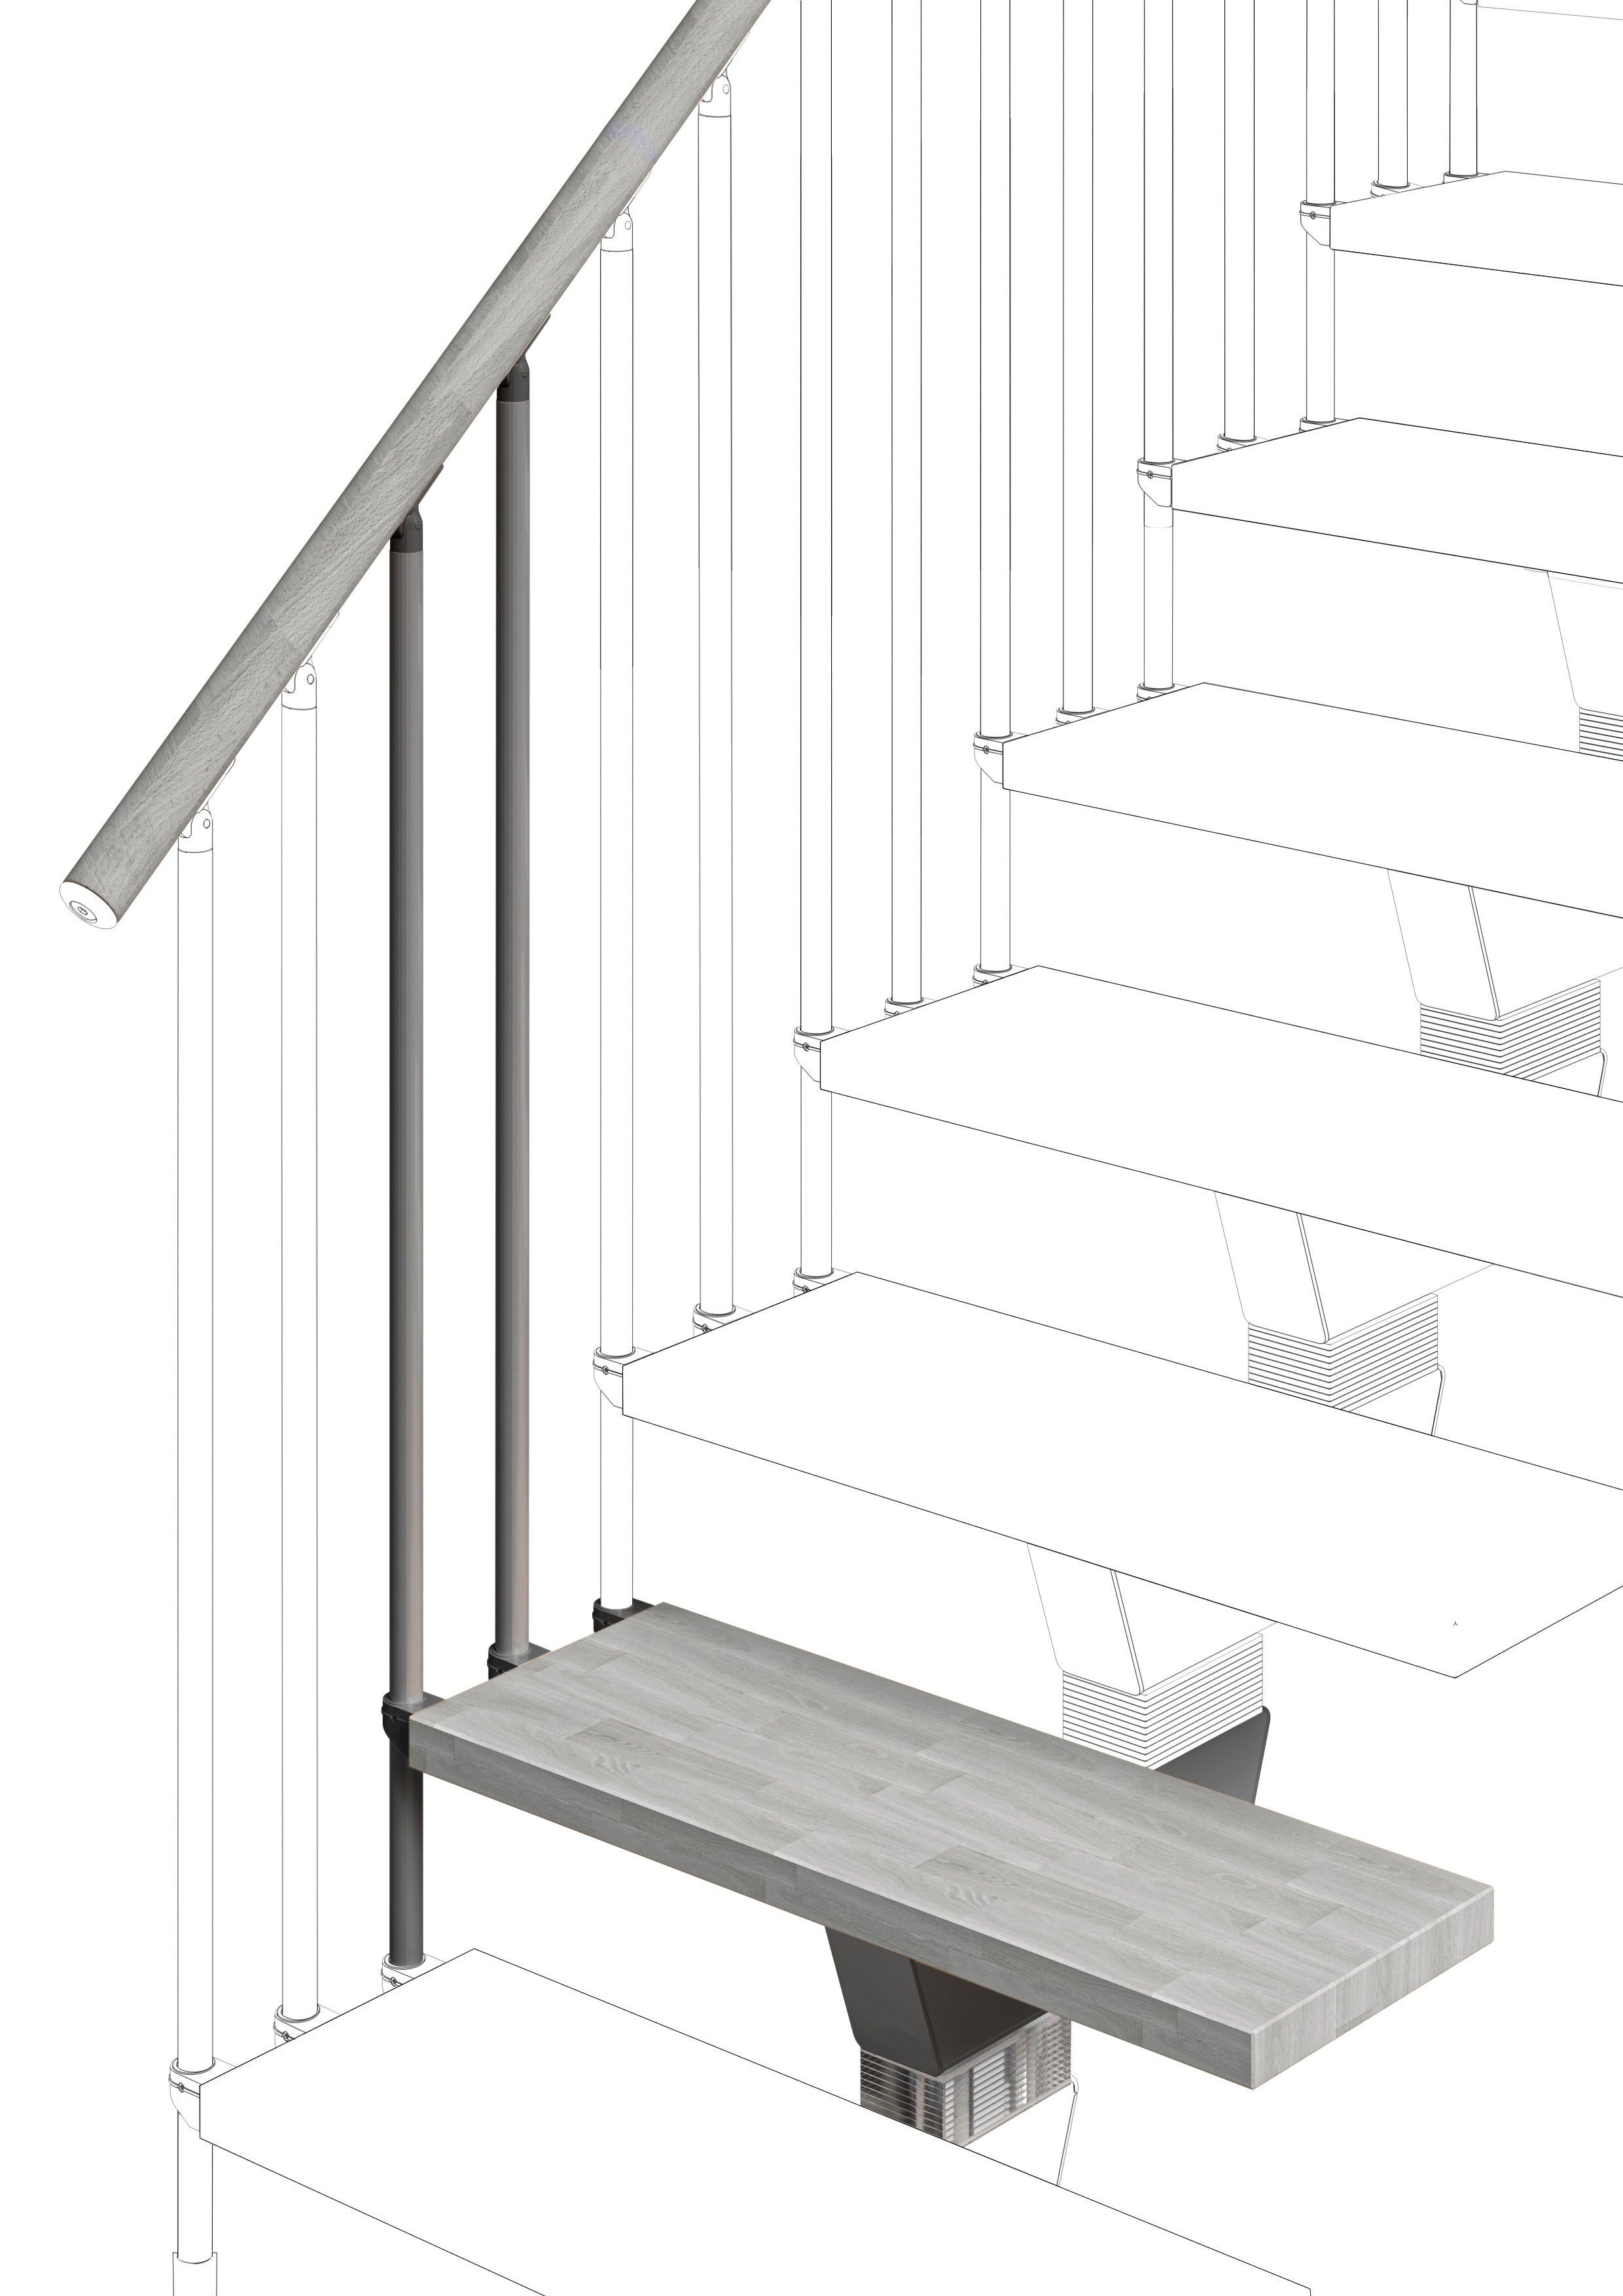 Additional step Modularis 75cm (with structure and railing) - Cement 89